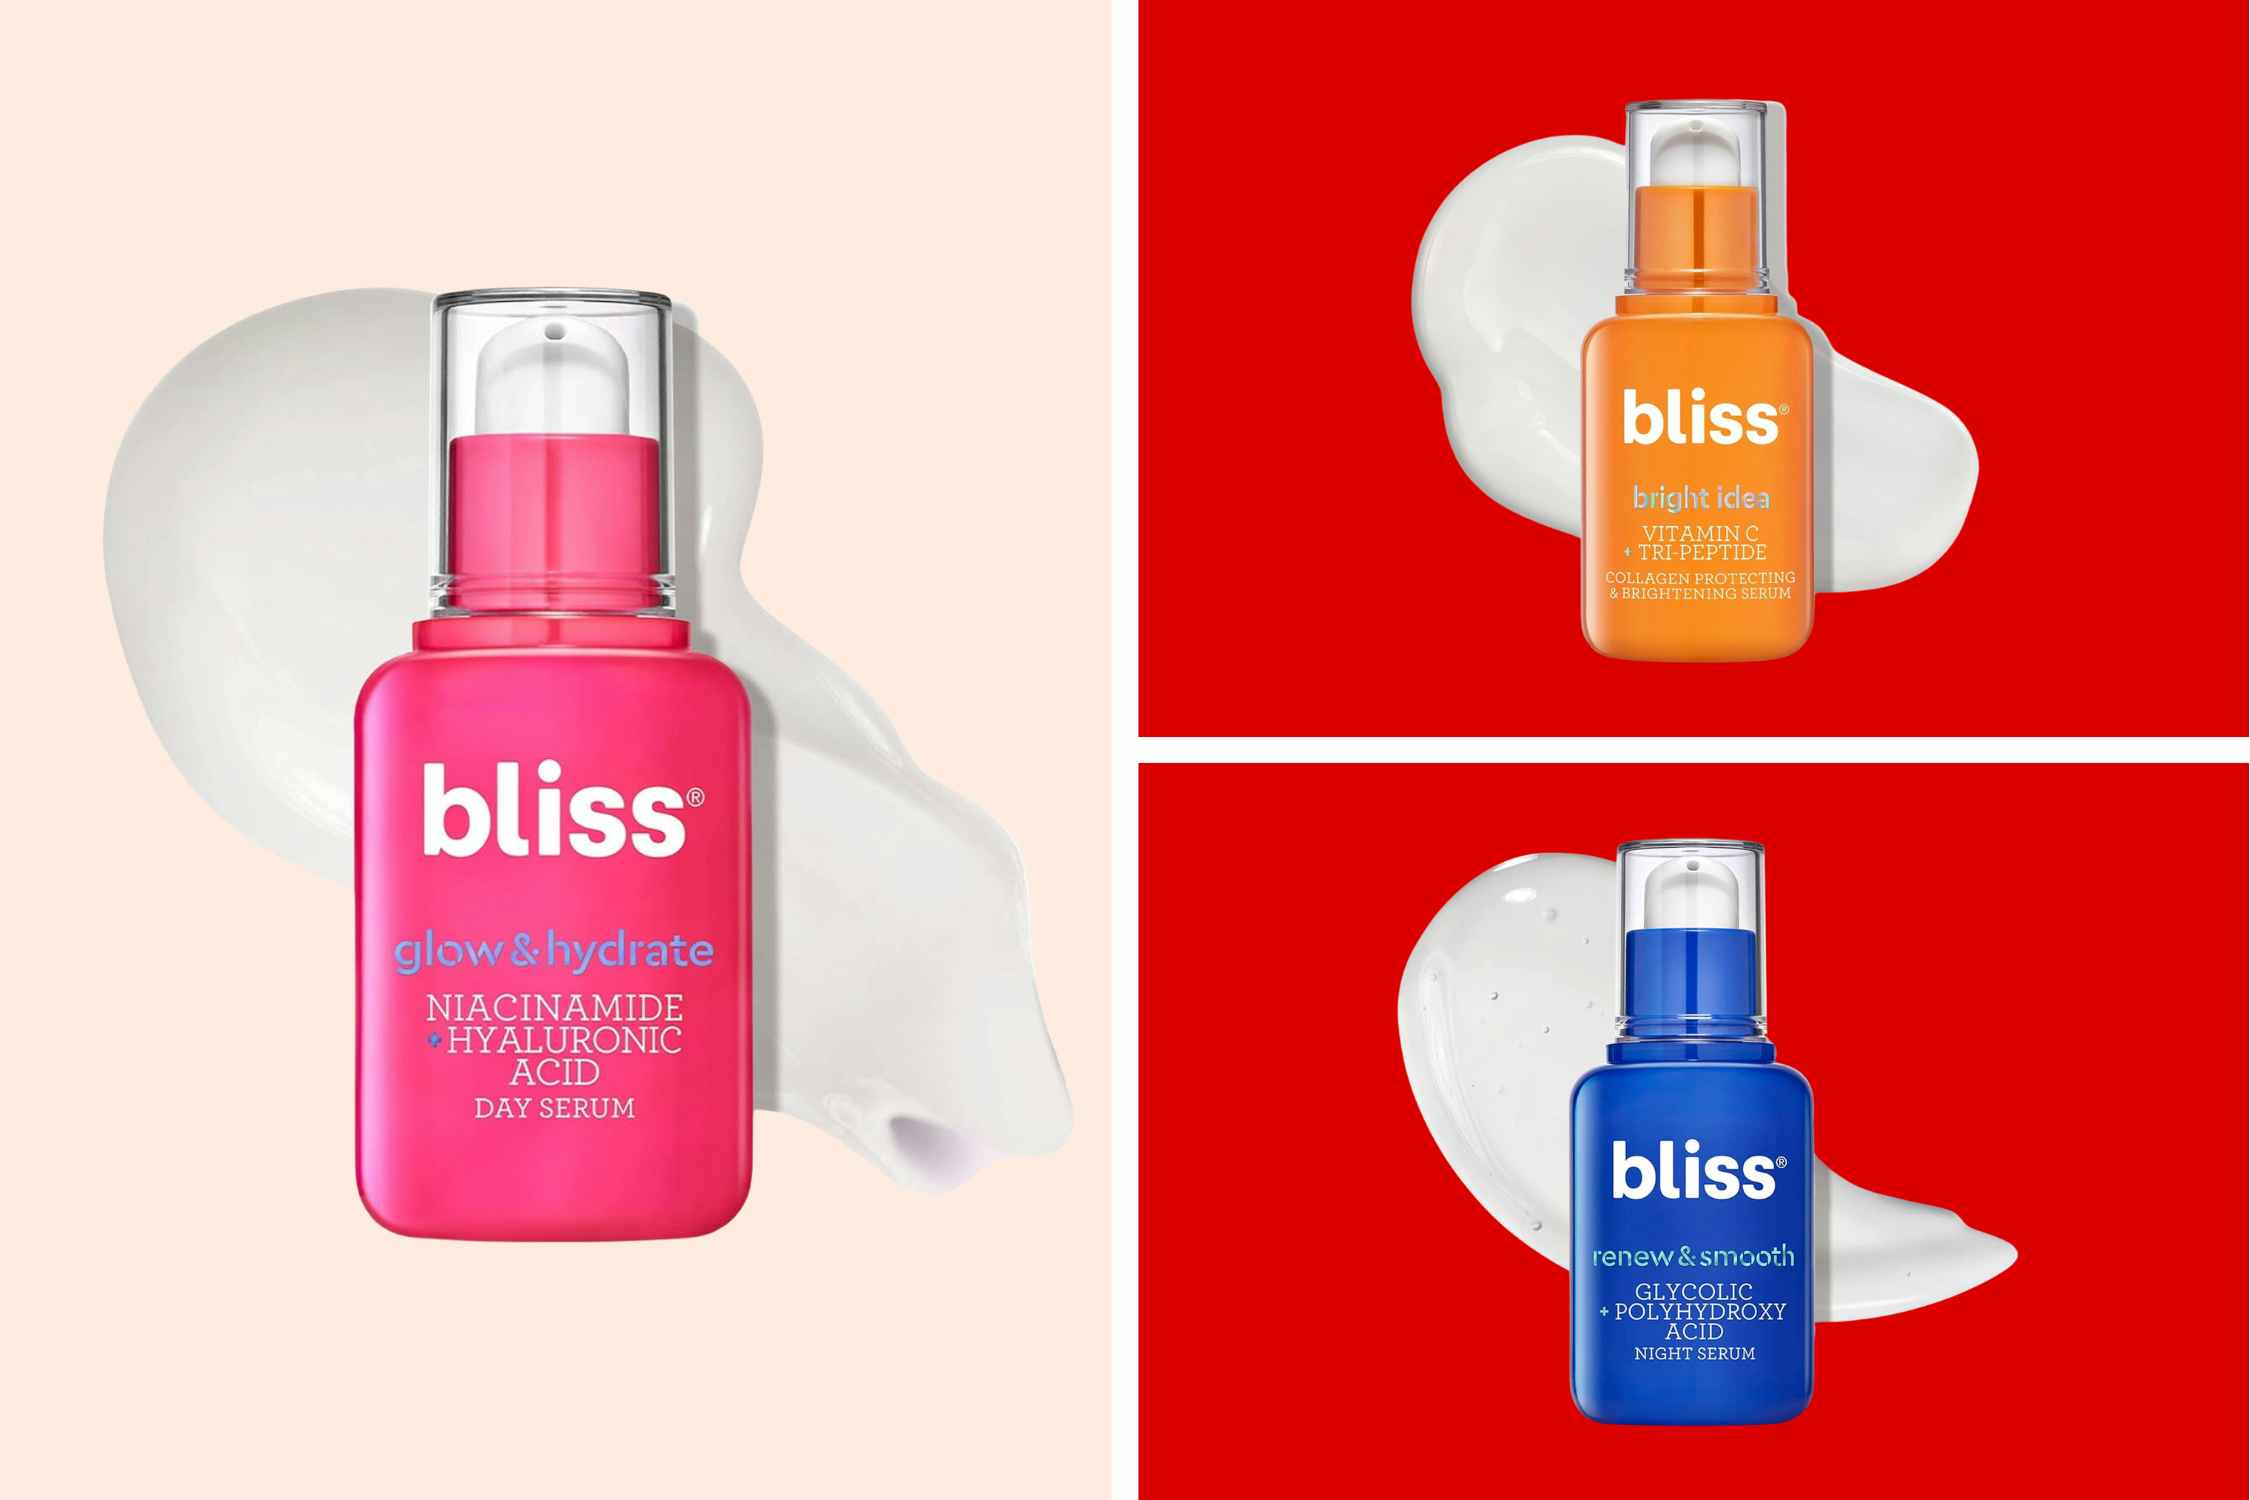 Bliss Skincare Serums, as Low as $11.90 on Amazon